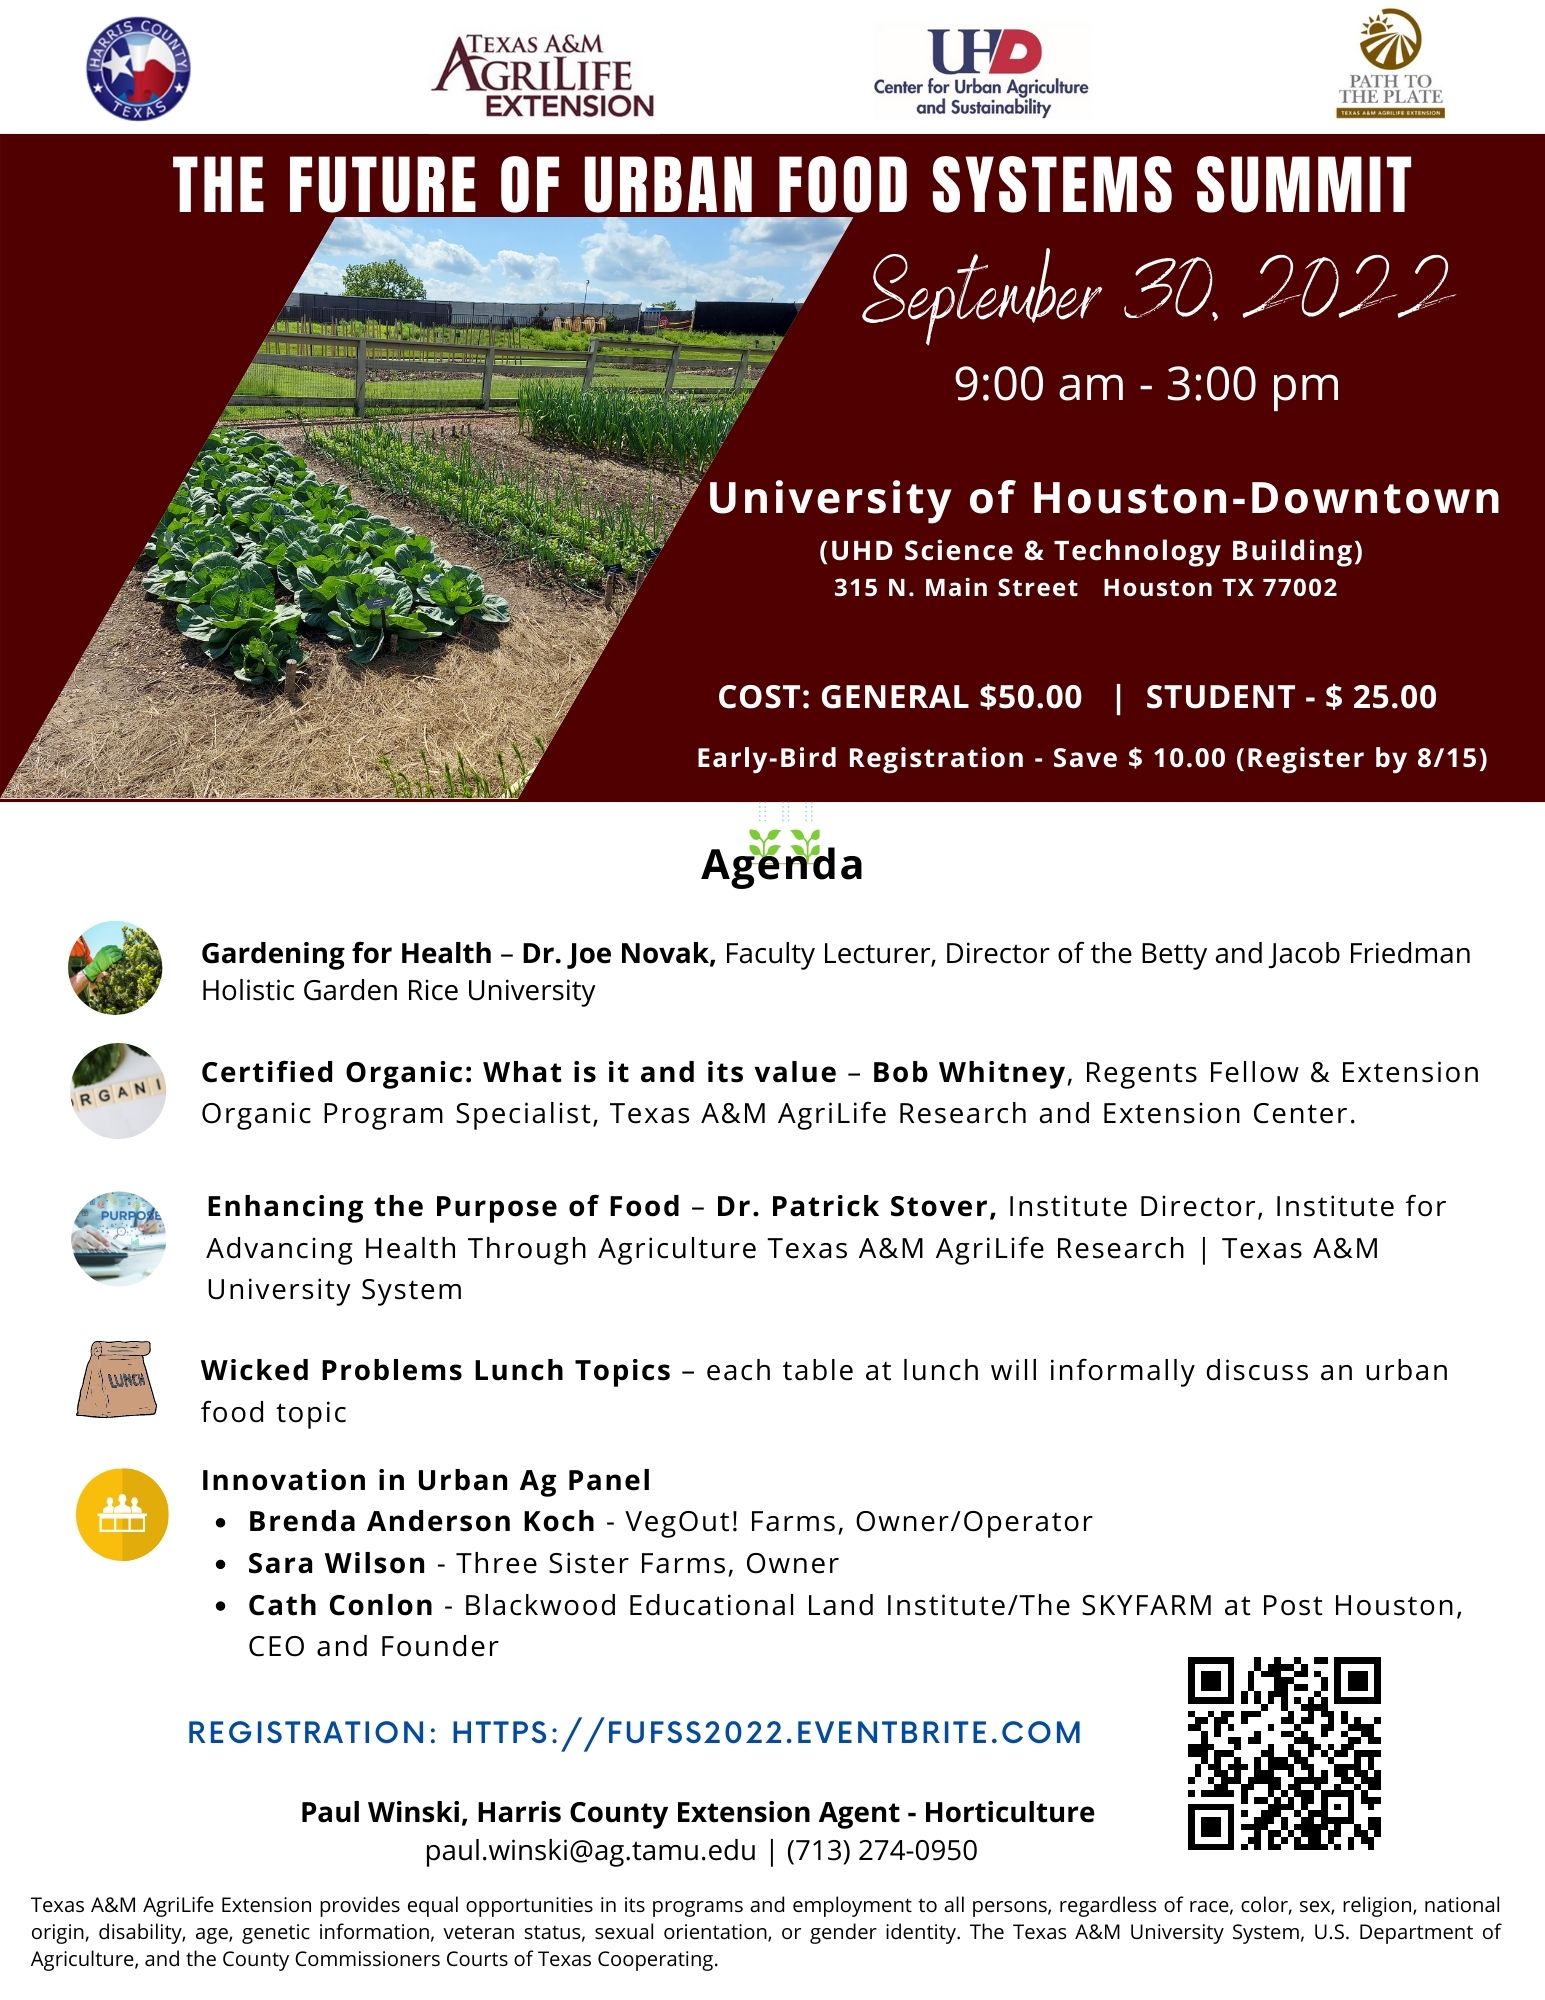 Flyer giving details of The Future of Urban Food Systems Summit